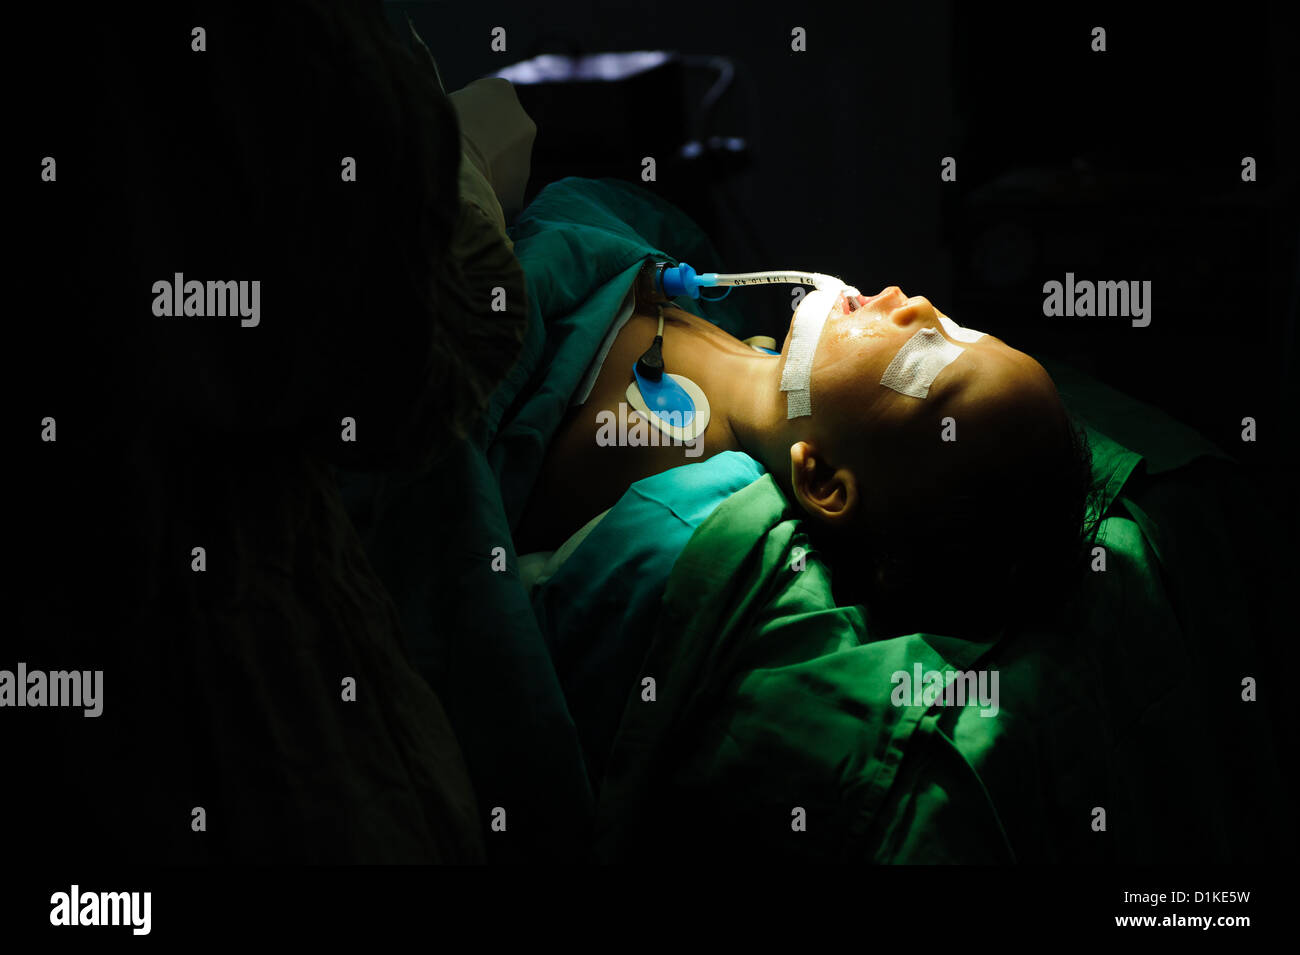 A young child lying in an operating theatre after surgery to repair a cleft in his soft palate, Bali, Indonesia. Stock Photo